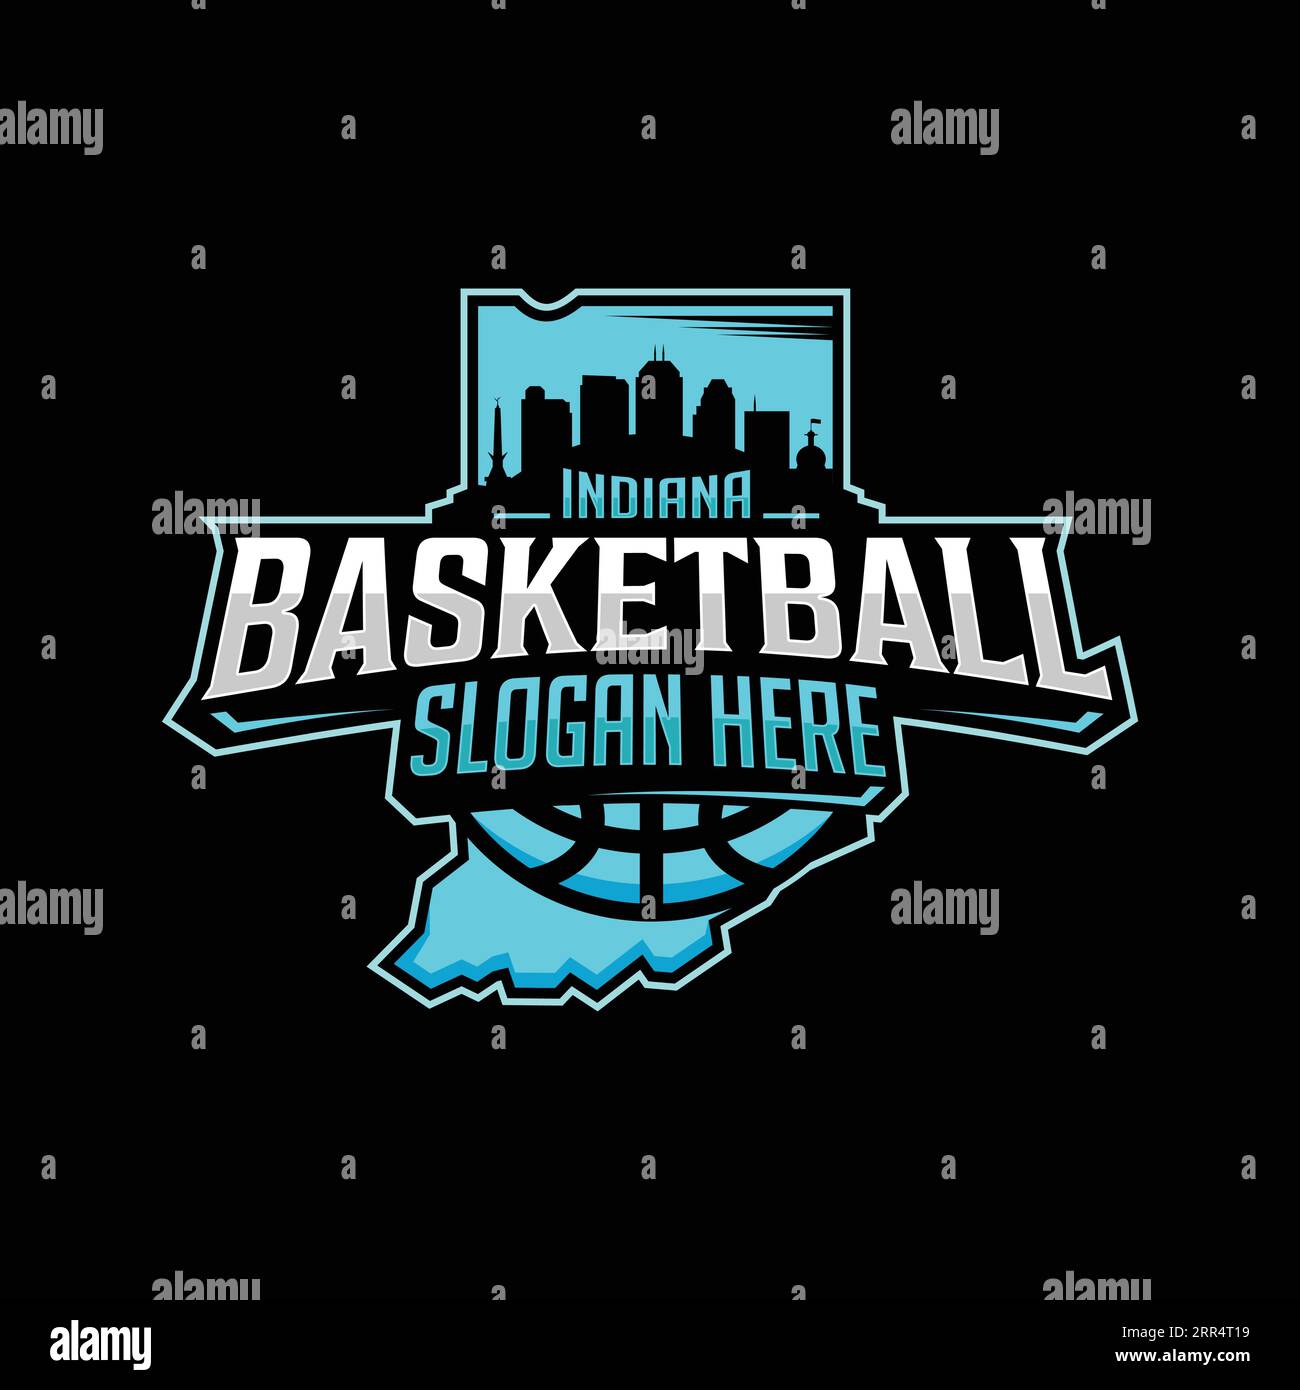 Indiana Basketball team logo emblem in modern style with black background. Vector illustration Stock Vector